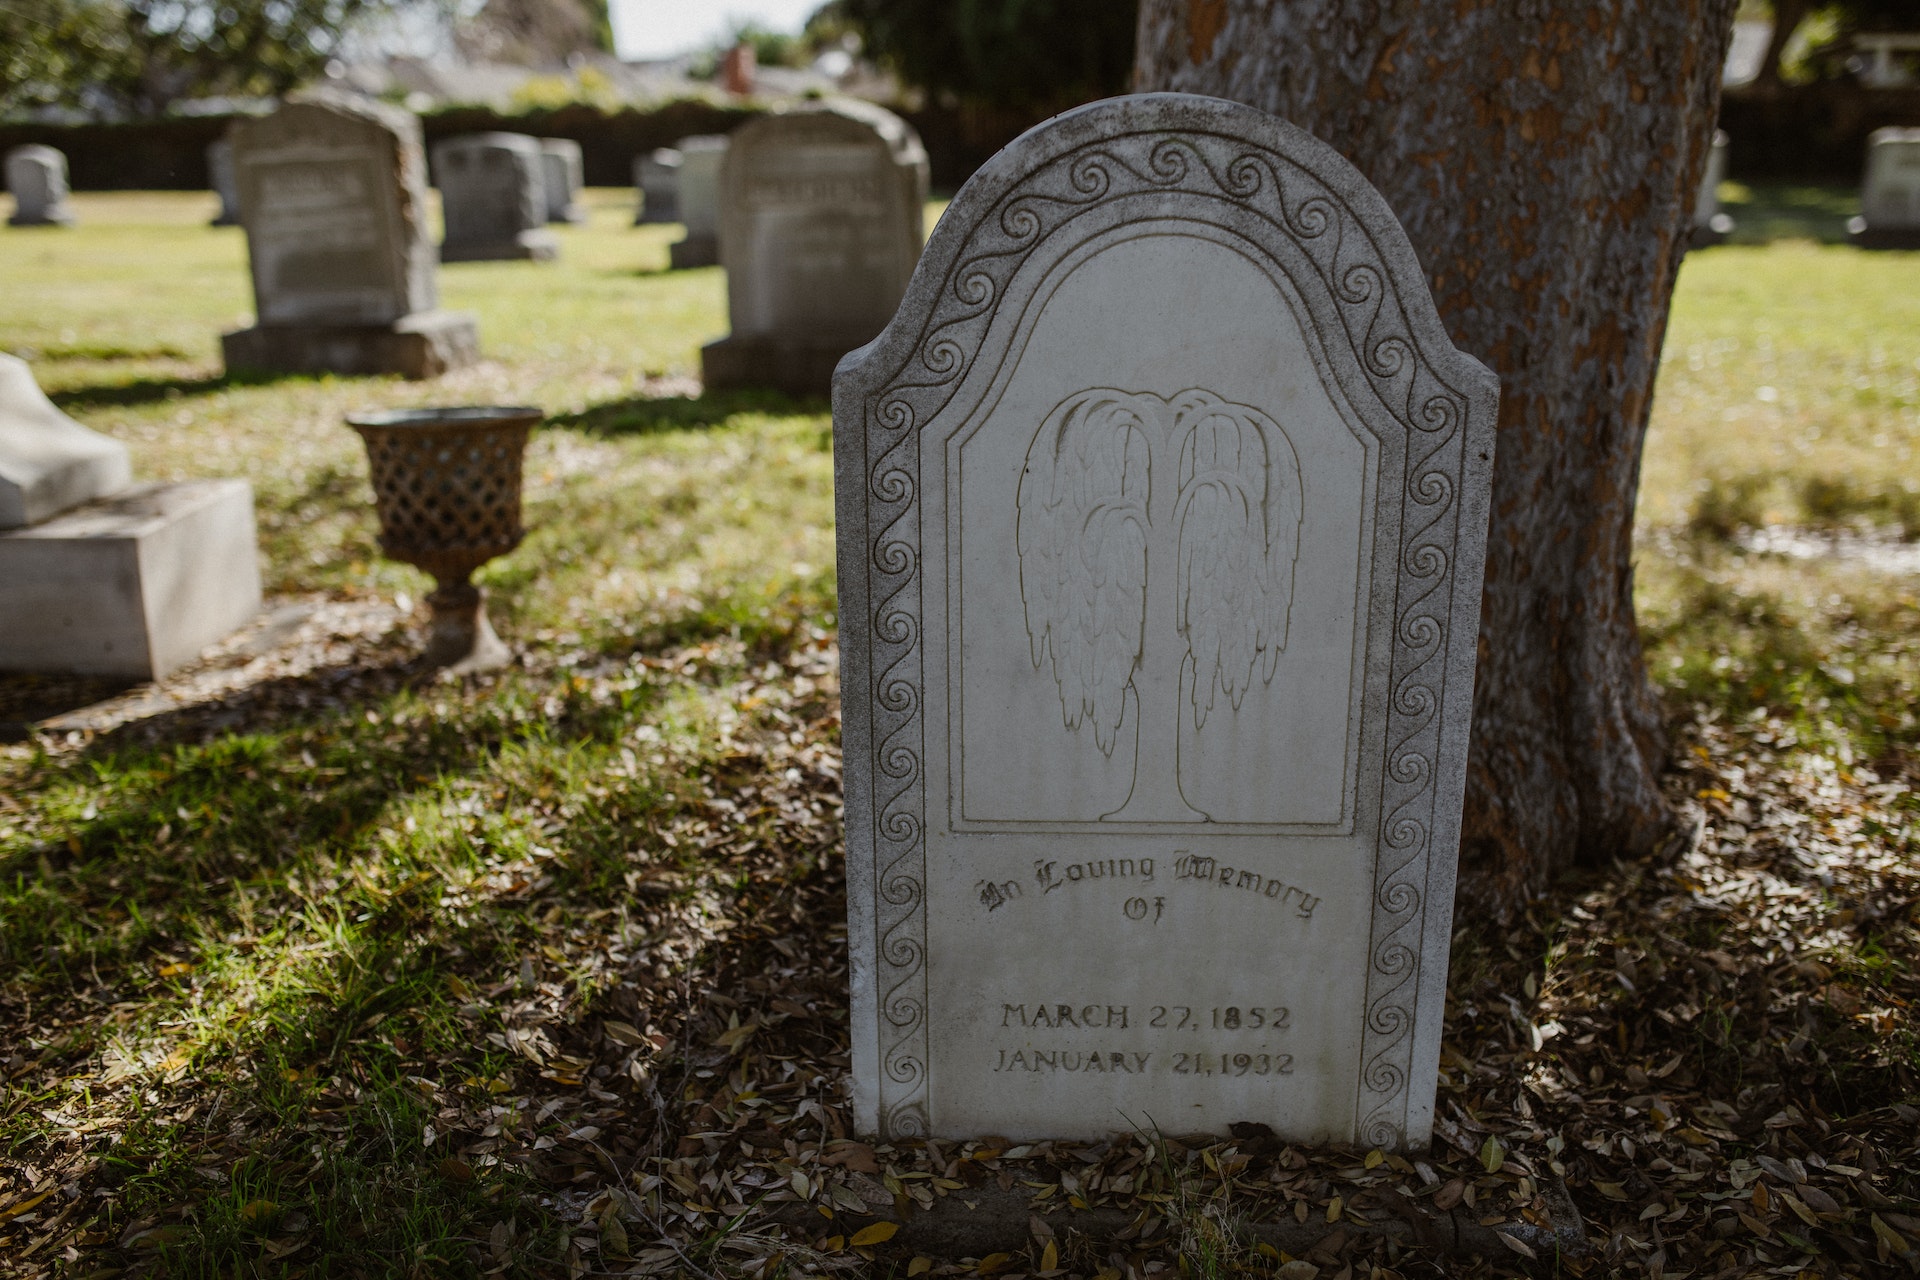 Surprising Headstone Designs That’ll Blow Your Mind!